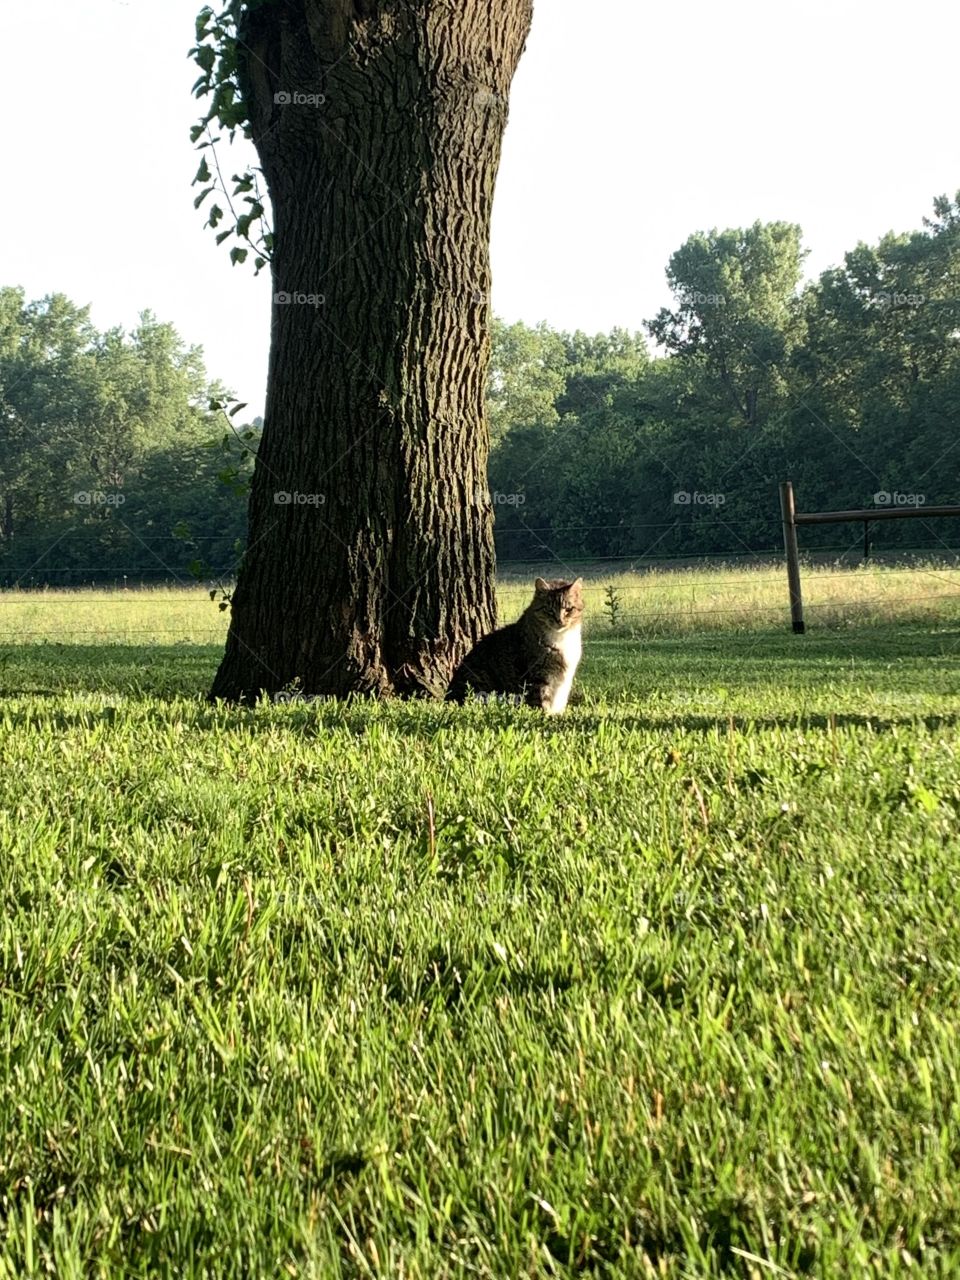 A grey tabby sitting in the grass by a large tree in the sunlight, blurred trees and a bright sky in the background